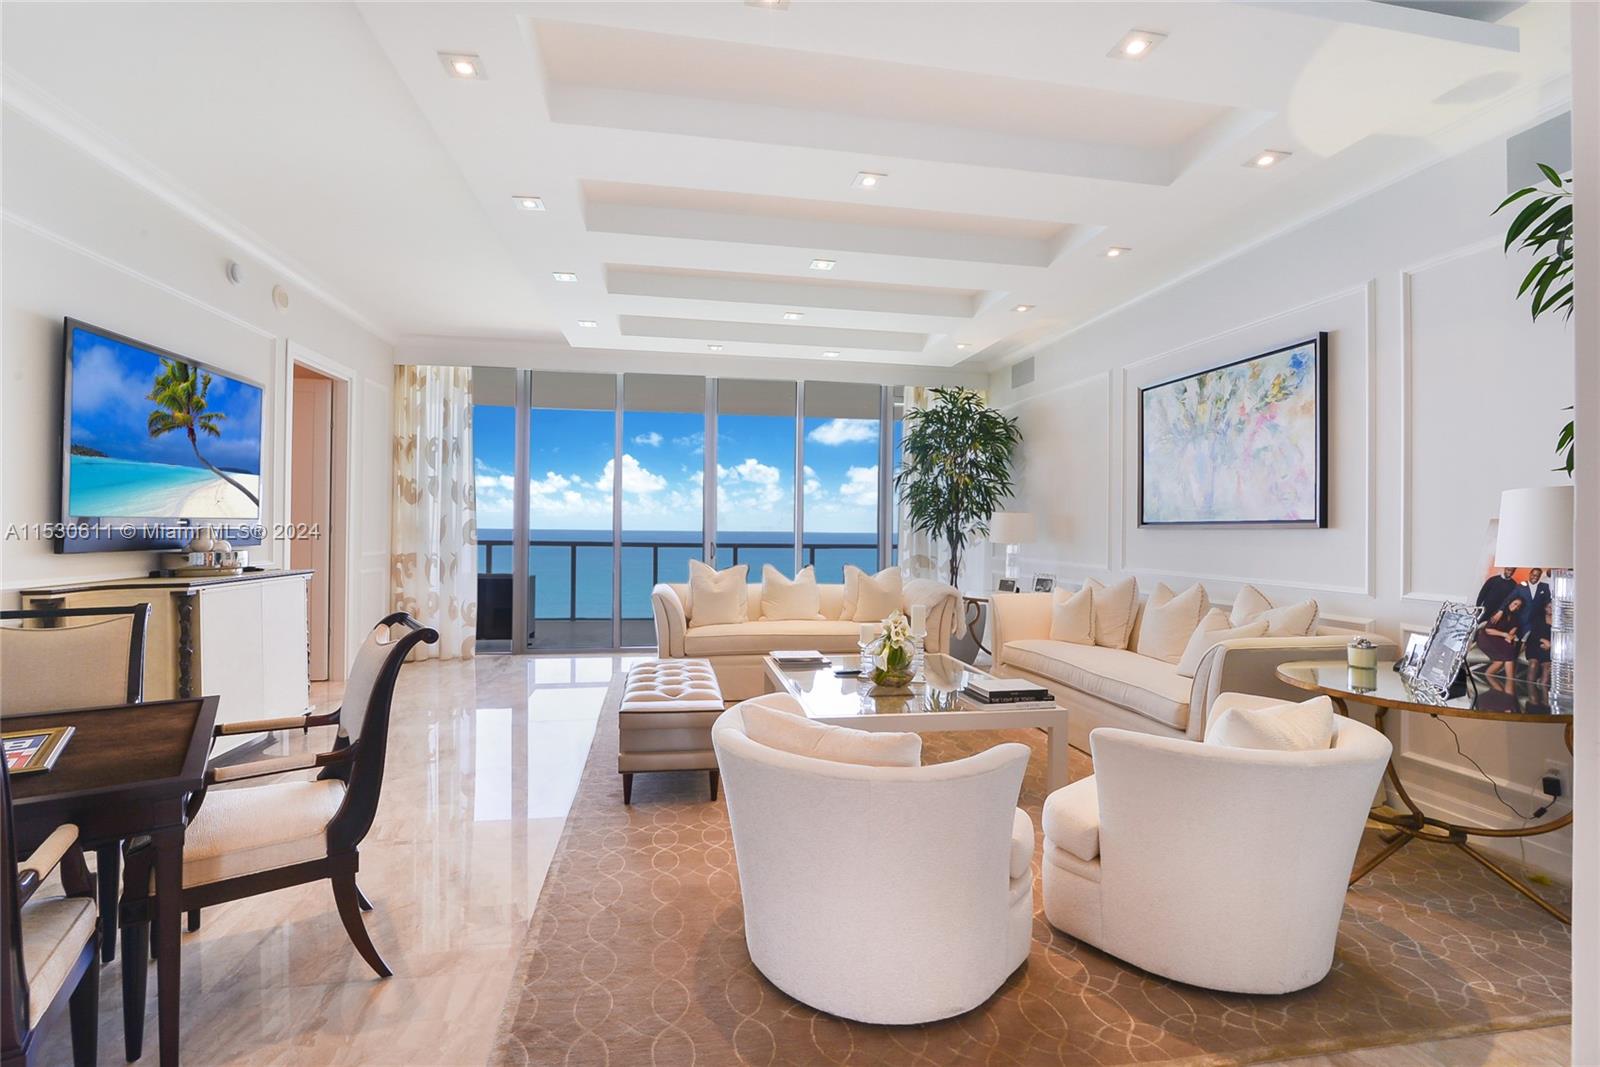 STUNNING FLOW THROUGH DIRECT OCEAN UNIT AT THE ST REGIS. 3 BEDROOM 3 1/2 BATH FULLY FURNISHED. ACCESS TO HOTEL AMENITIES, BEACH ,POOL, SPA, RESTAURANTS, ETC. MINIMUM 1 YEAR RENTAL EASY TO SHOW .. CALL BROKER TO SCHEDULE AN APPOINTMENT